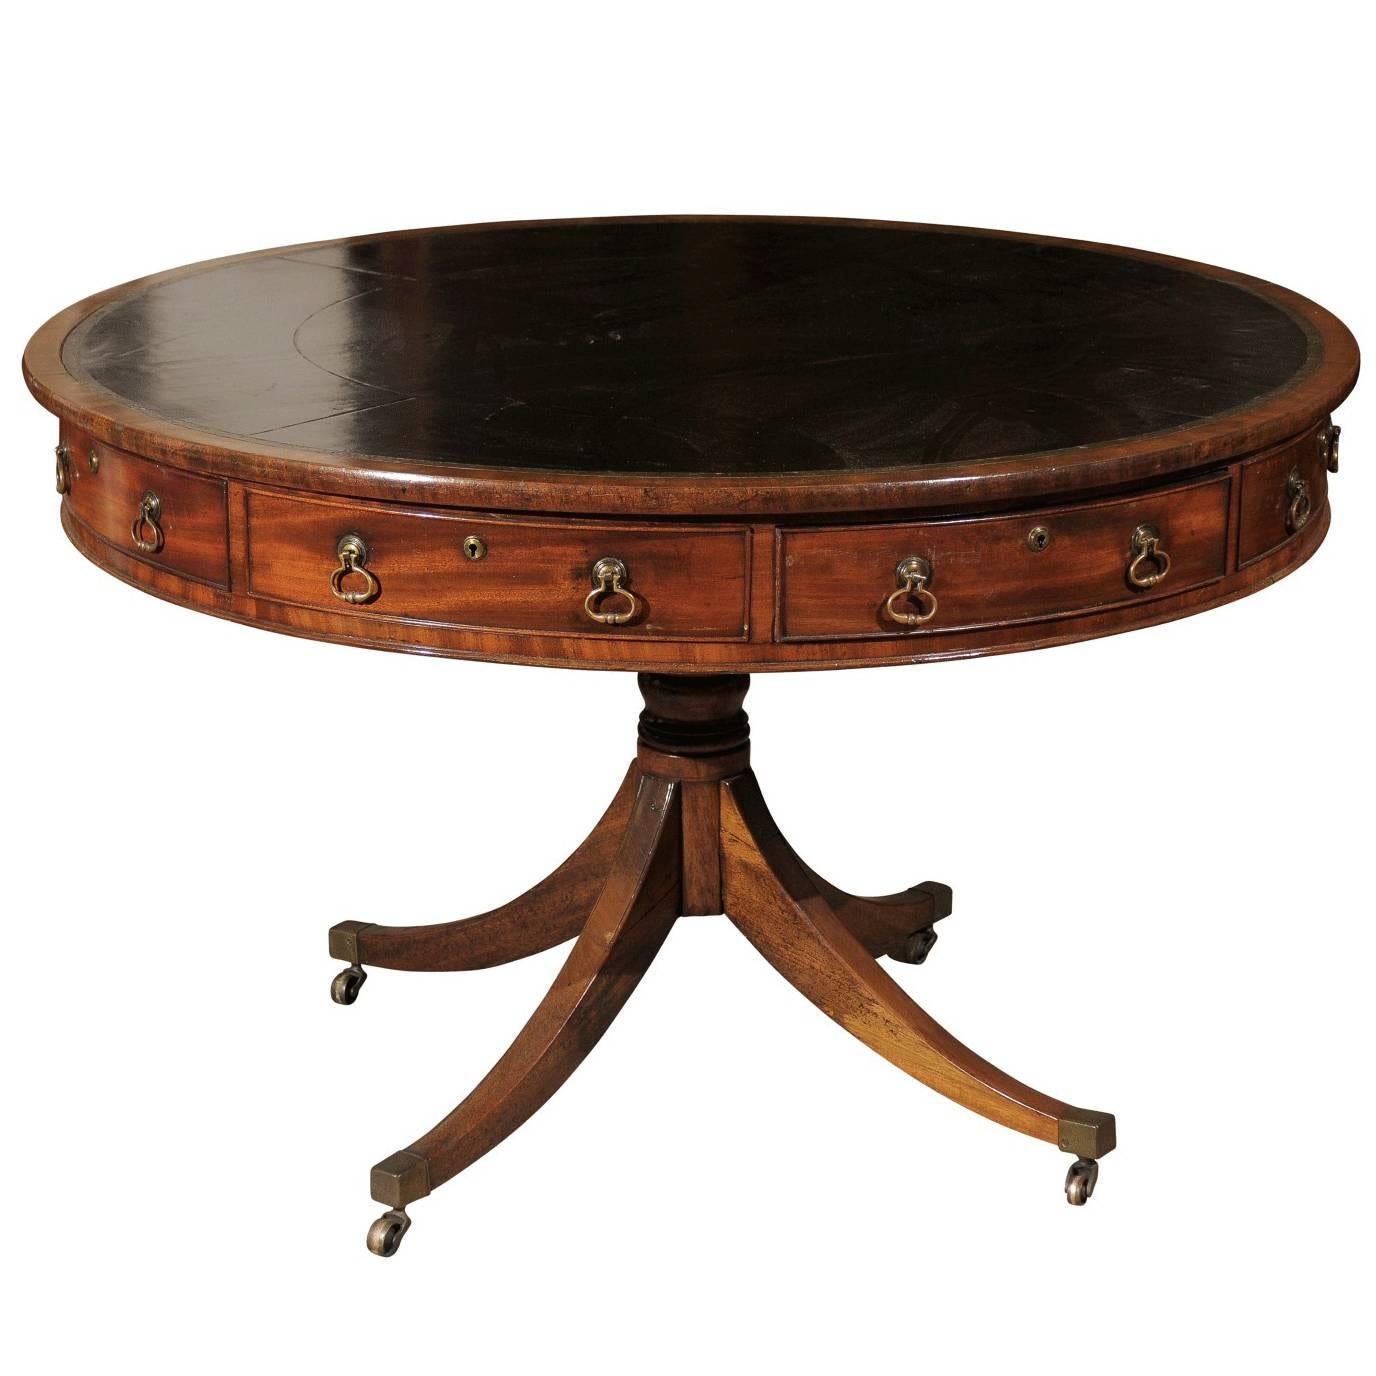 19th Century English Mahogany Rent Table with Leather Top